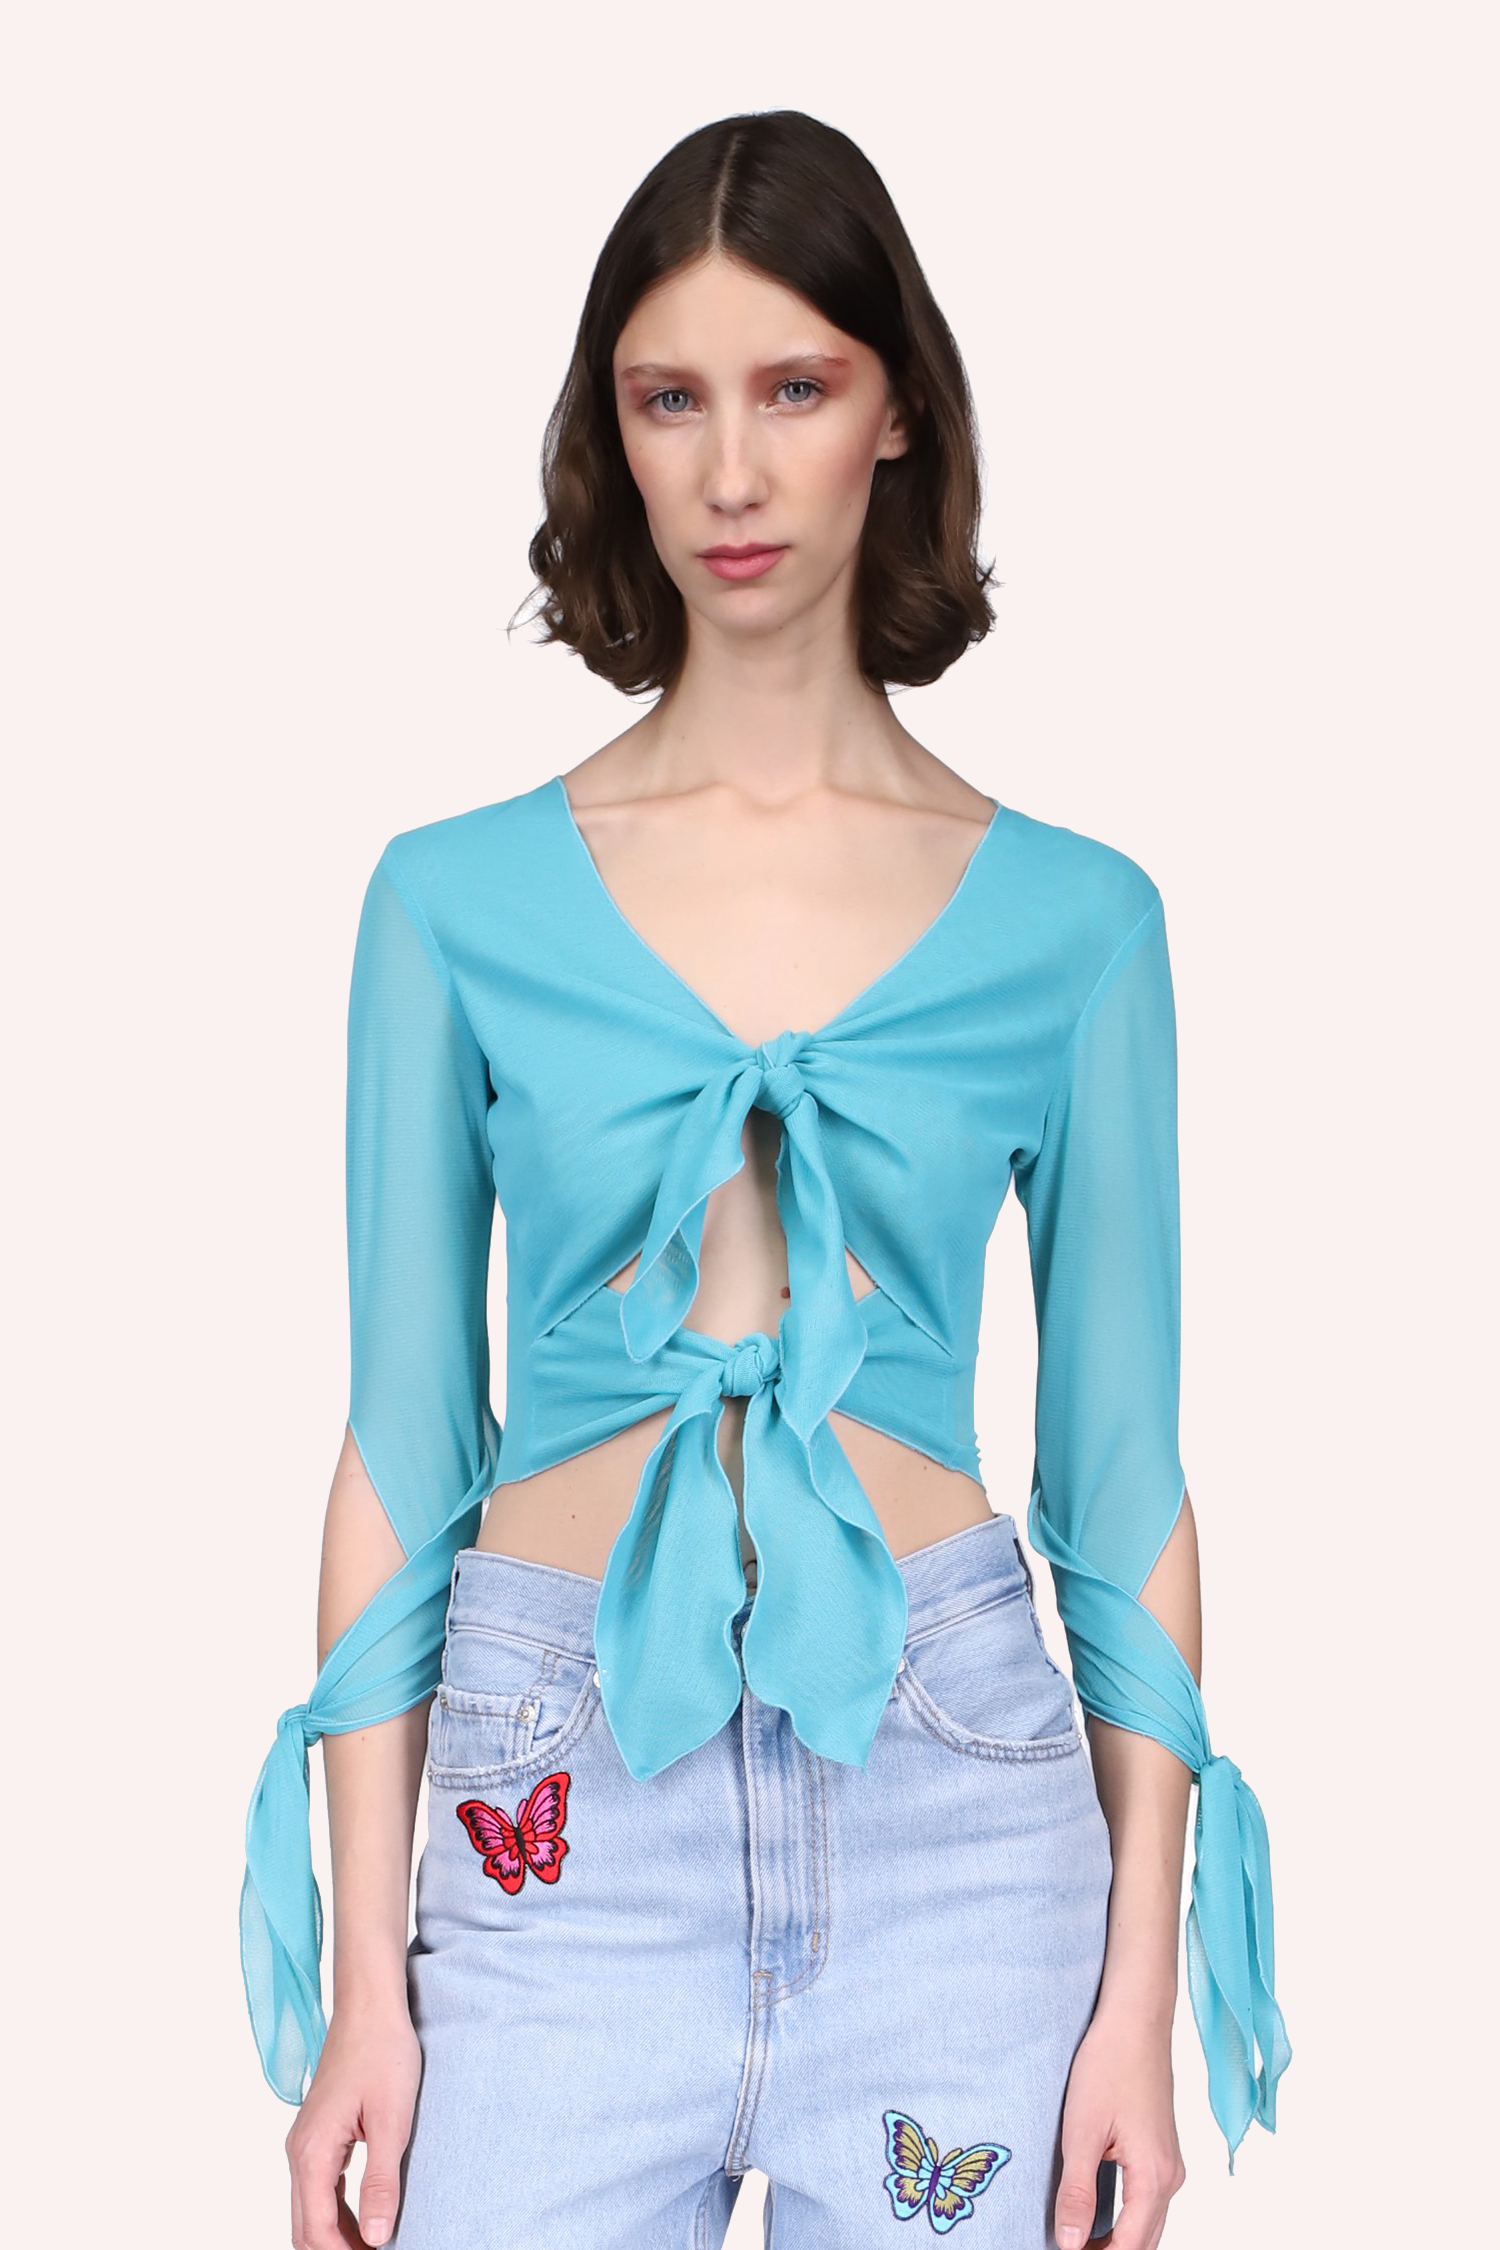 The Gisele Top Seafoam, fastened with 2 ribbons in the front and one on wrapped each arm